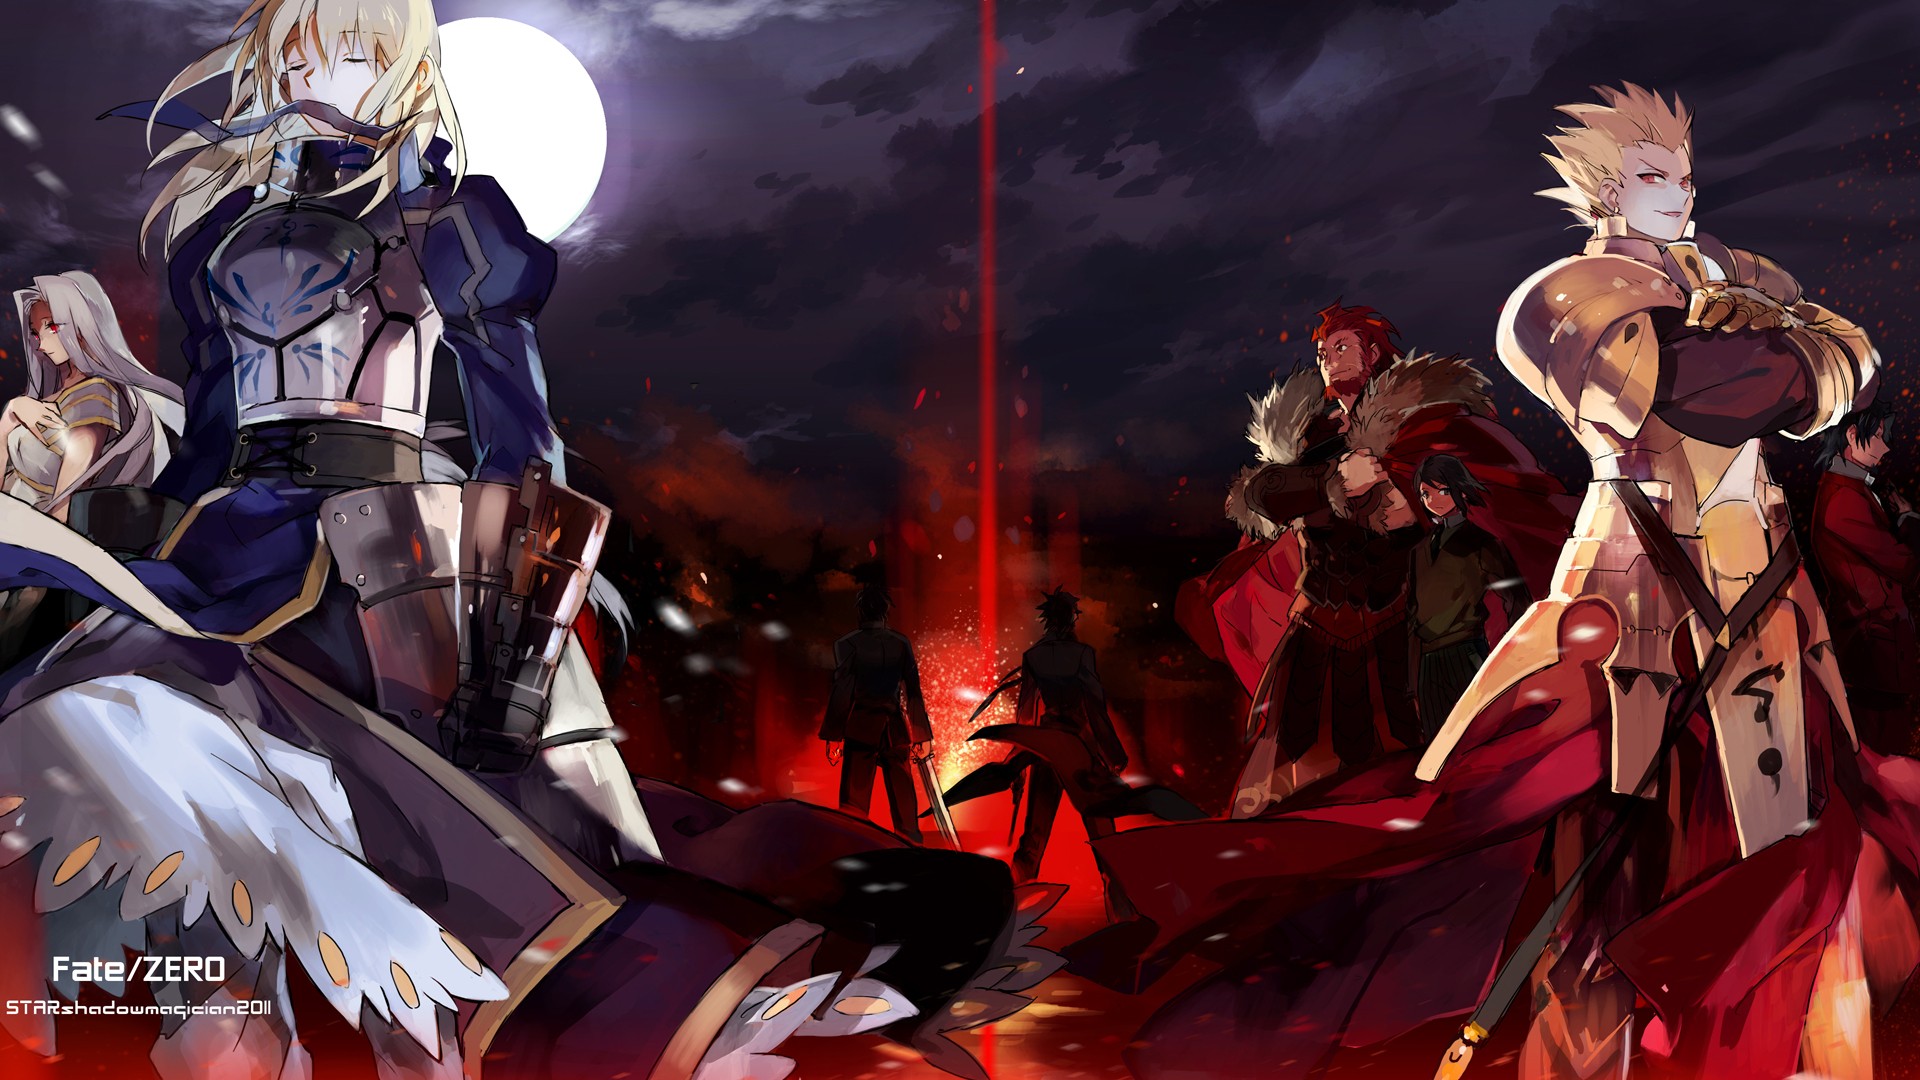 Free Download Images Fate Stay Night Hd Wallpaper And Background Photos 19x1080 For Your Desktop Mobile Tablet Explore 41 Fate Zero Hd Wallpaper Fate Saber Wallpaper Fate Zero